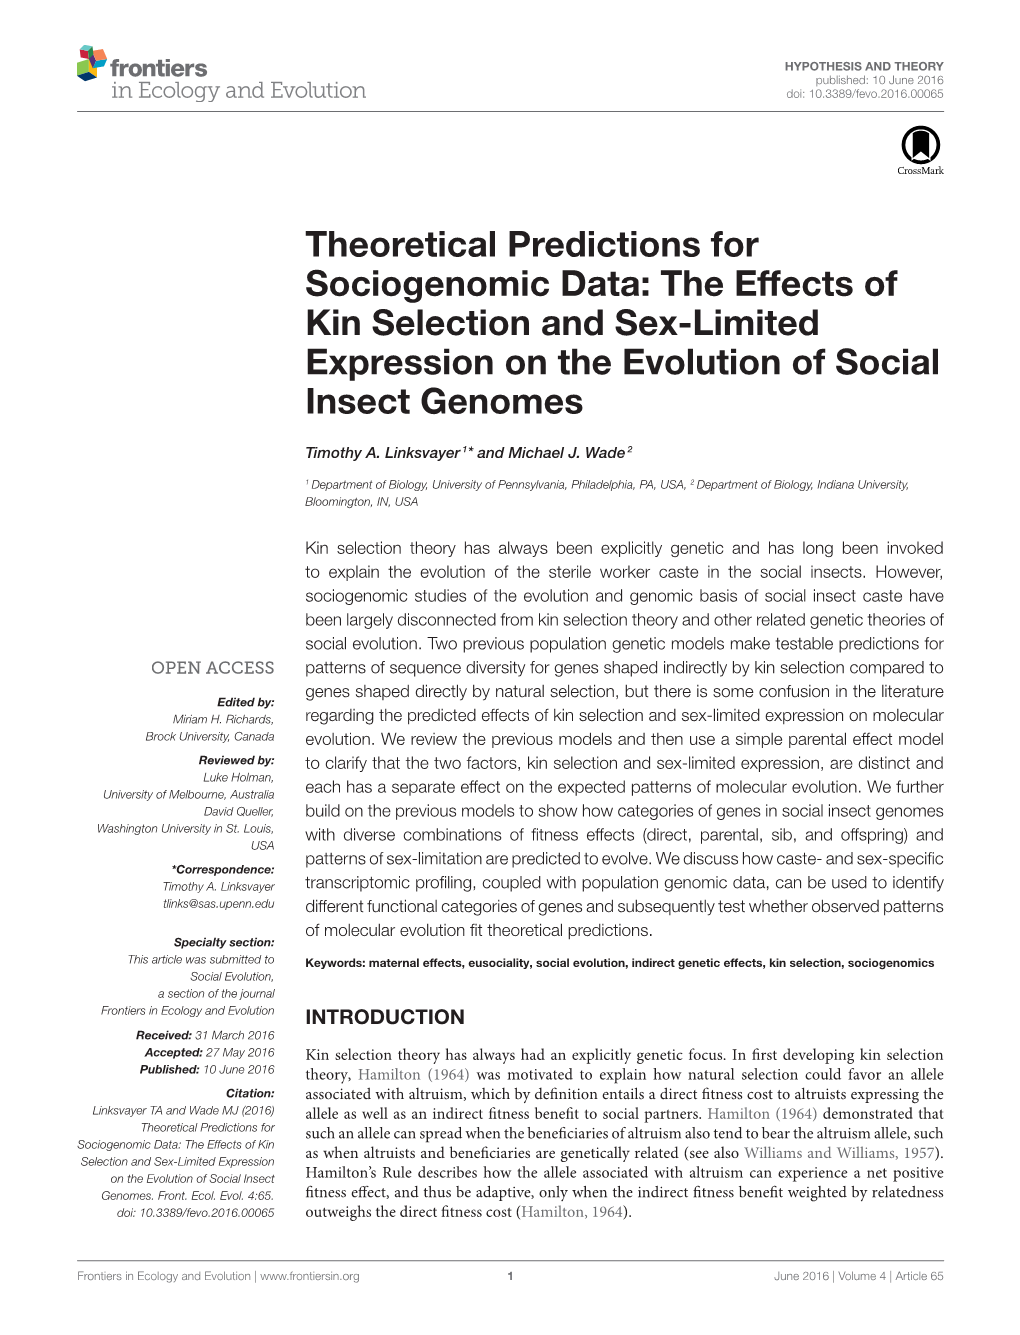 Theoretical Predictions for Sociogenomic Data: the Effects of Kin Selection and Sex-Limited Expression on the Evolution of Social Insect Genomes